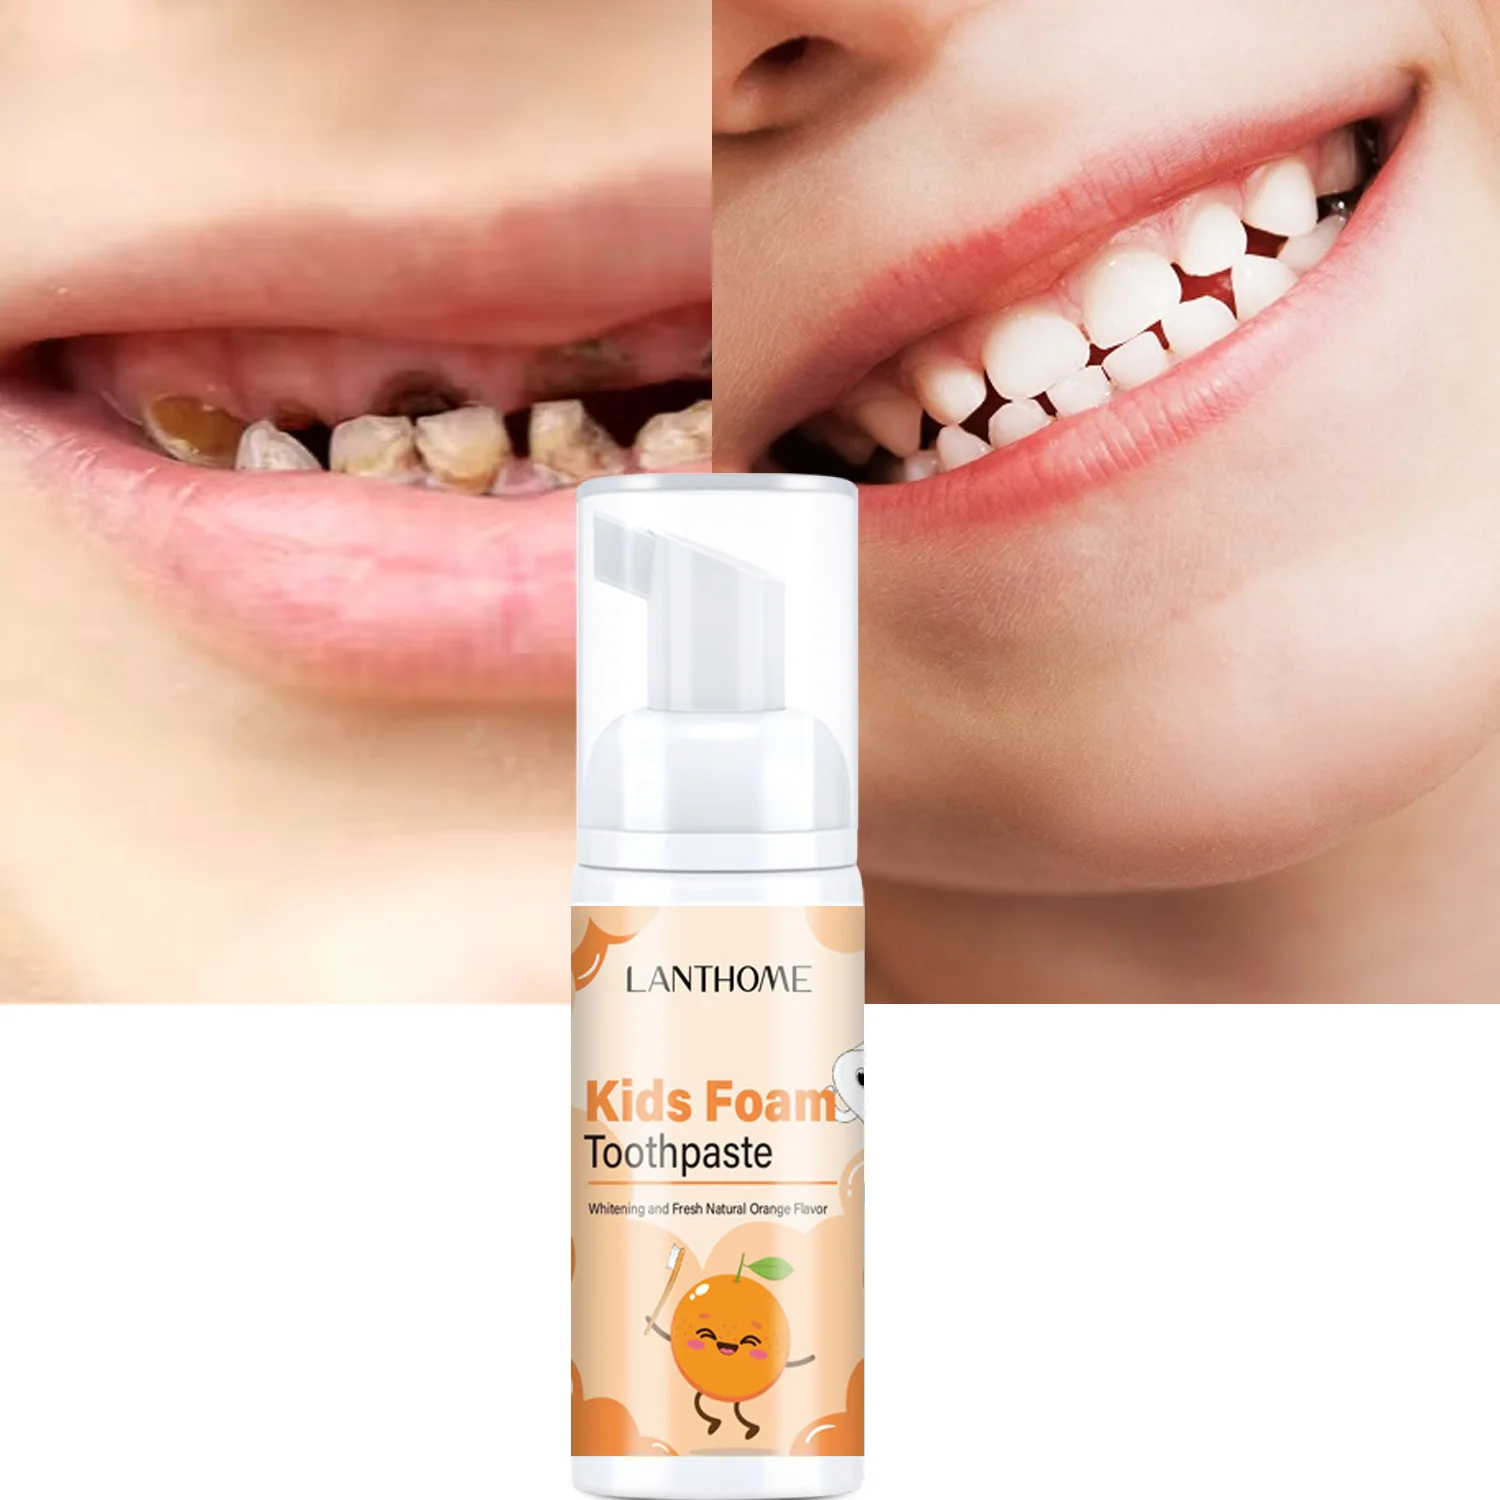 

Kids Foam Toothpaste Stain Removal Whitening Tooth Anti-cavity Oral Cleaning Fruit Flavor Mousse Toothpaste Daily Teeth Care